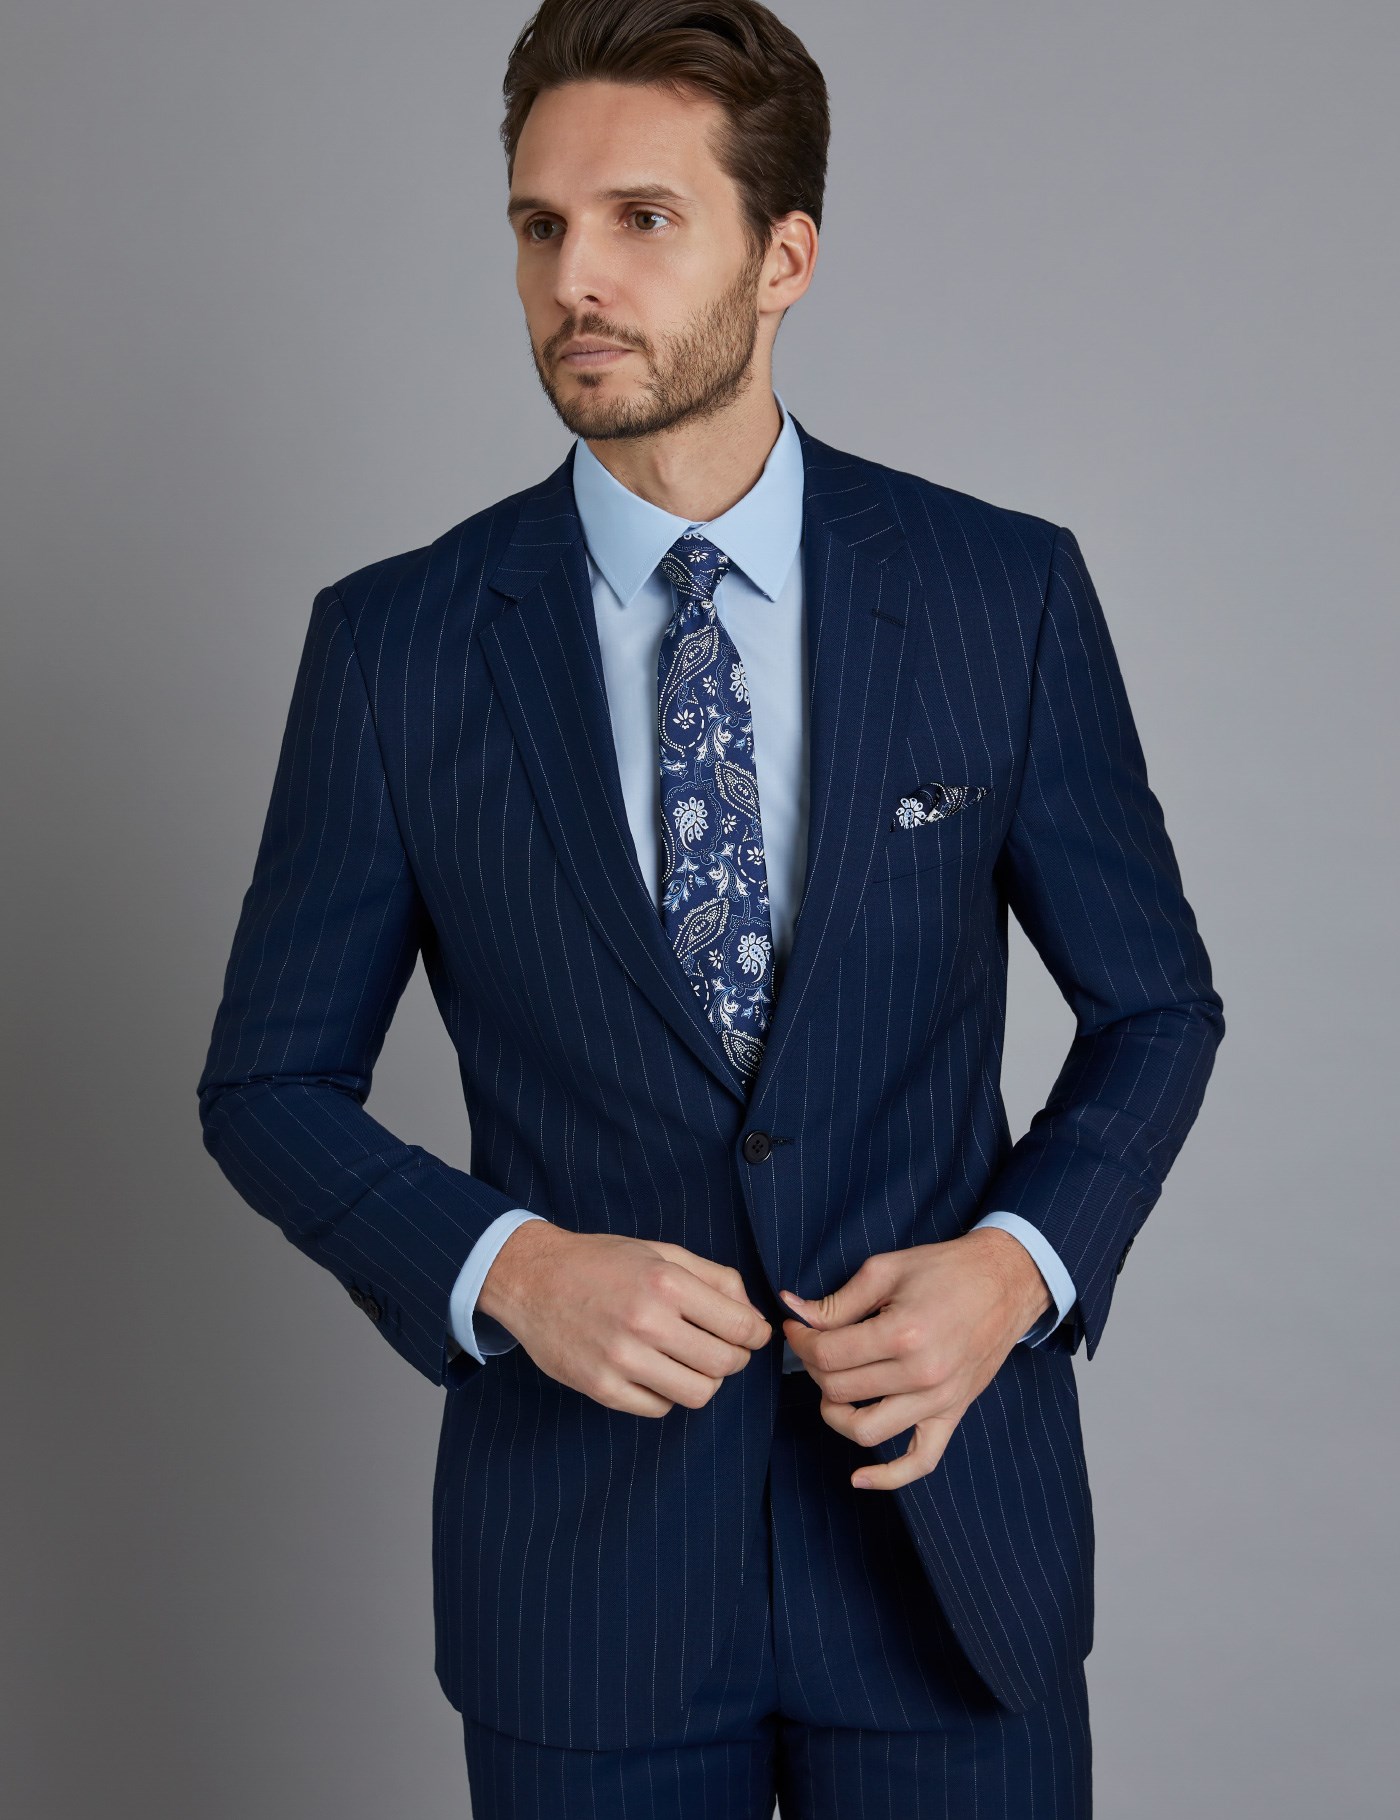 blue and white pinstripe suit